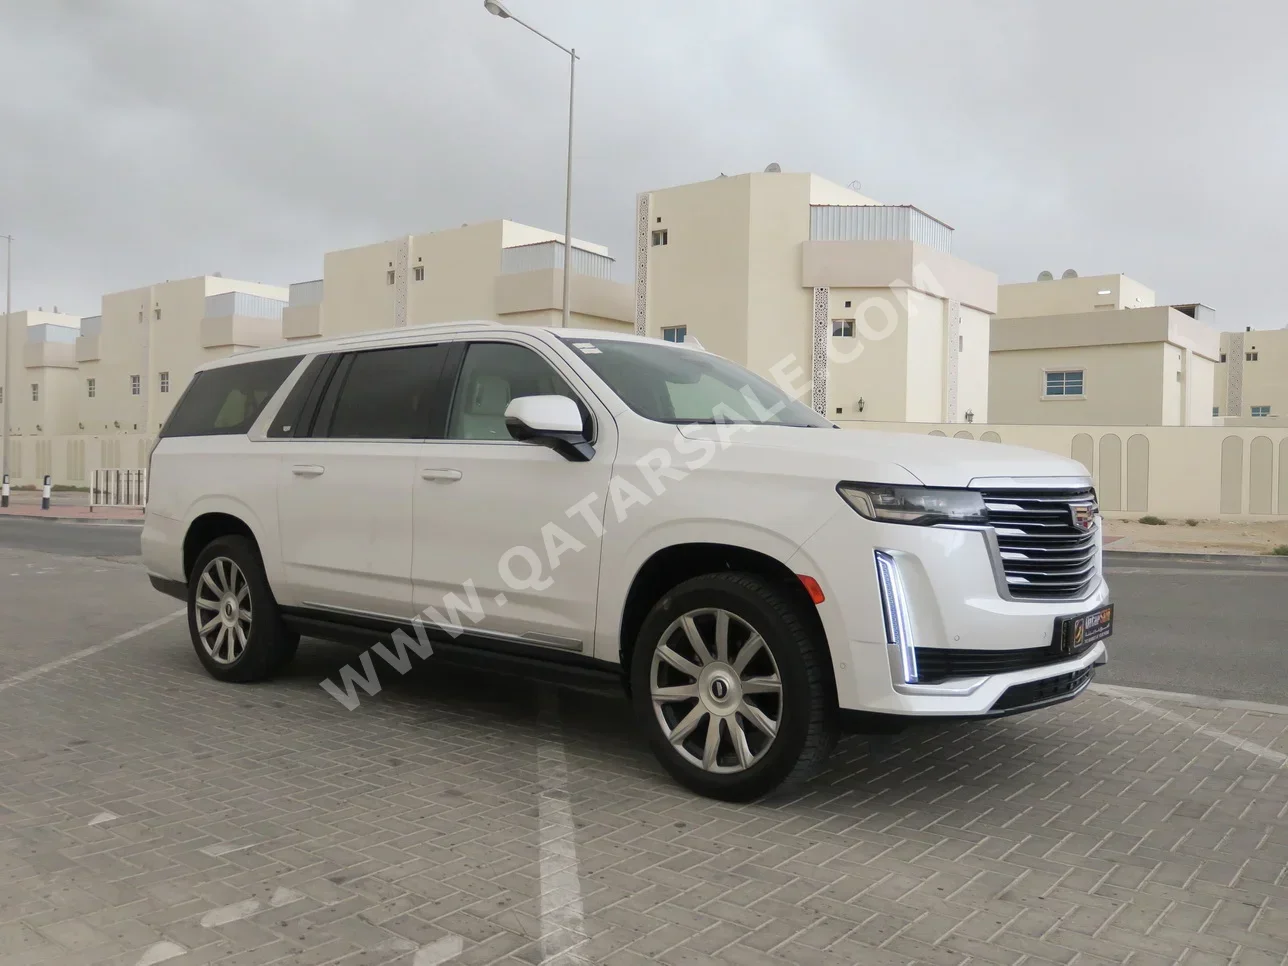 Cadillac  Escalade  Platinum  2021  Automatic  73,000 Km  8 Cylinder  Four Wheel Drive (4WD)  SUV  White  With Warranty